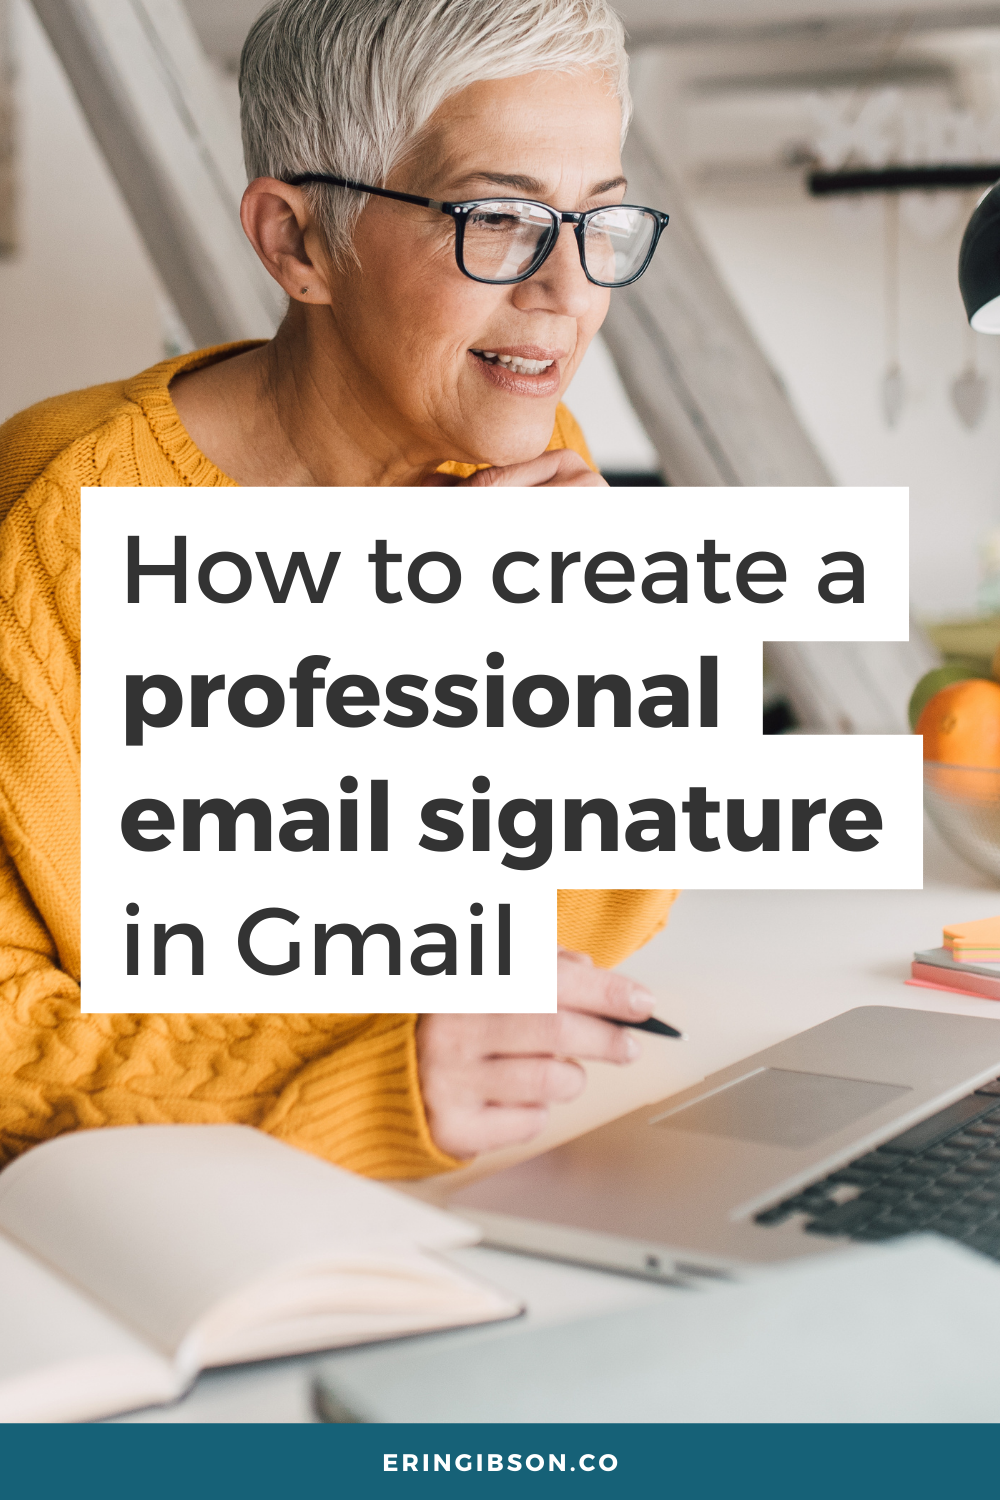 How to create a professional email signature in Gmail